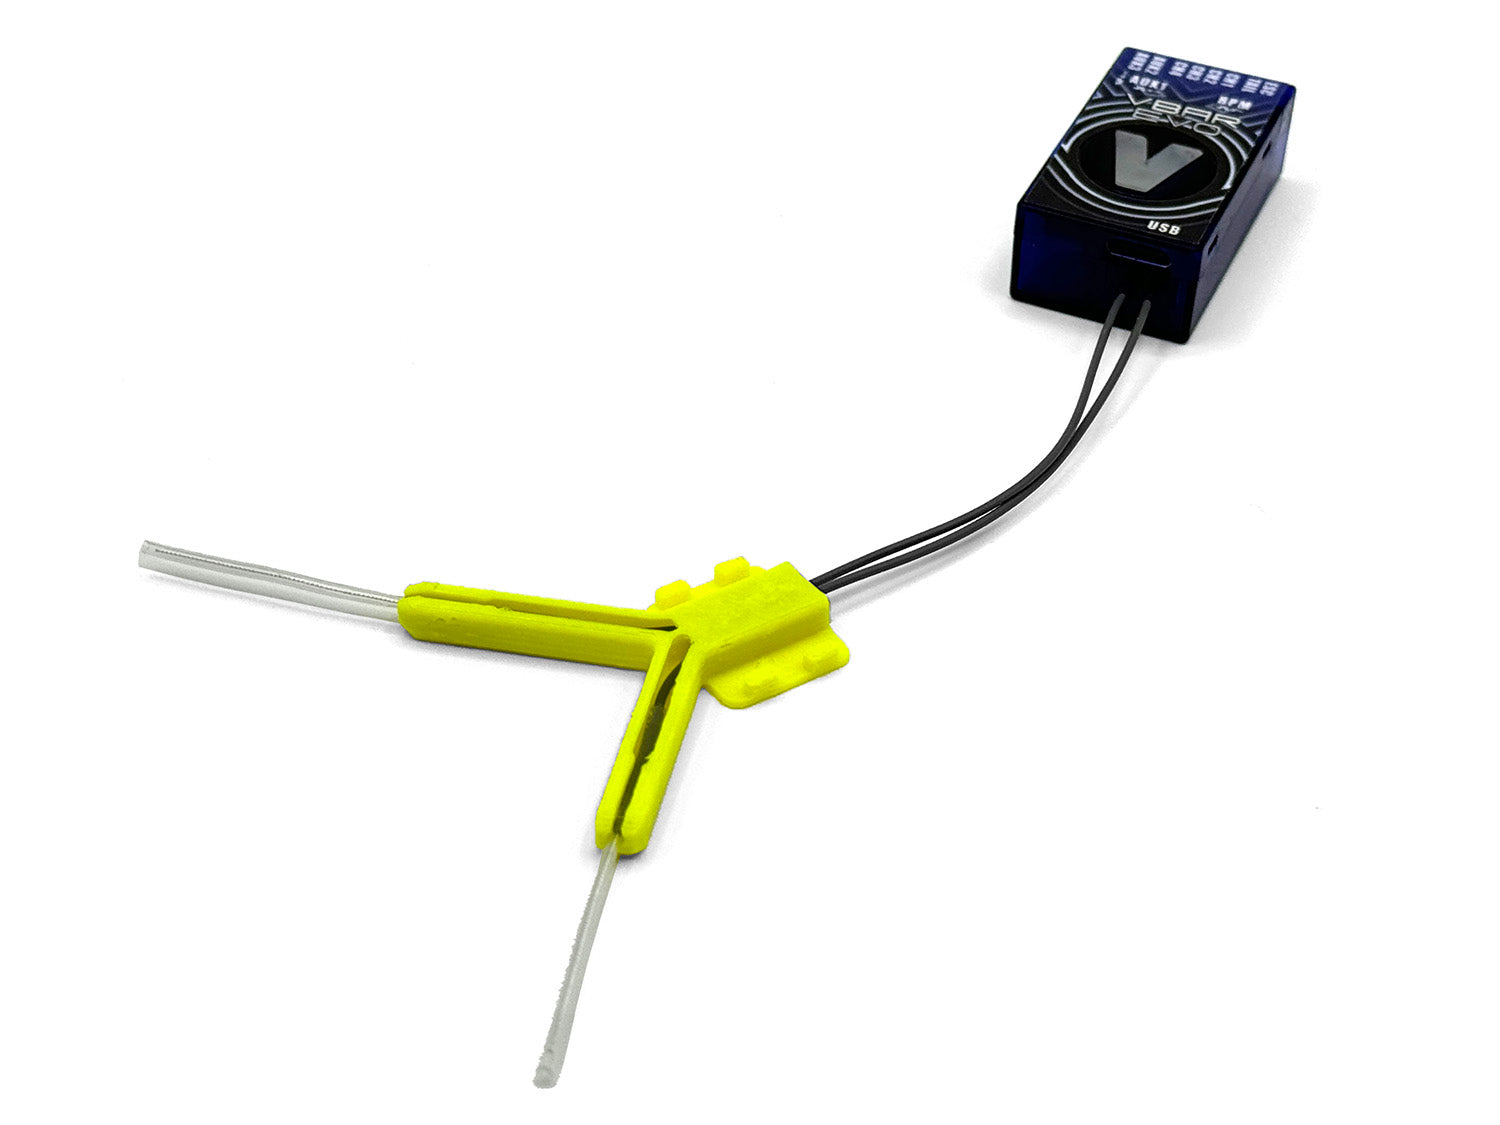 Universal Antenna Mount for Flat Surfaces (Yellow)